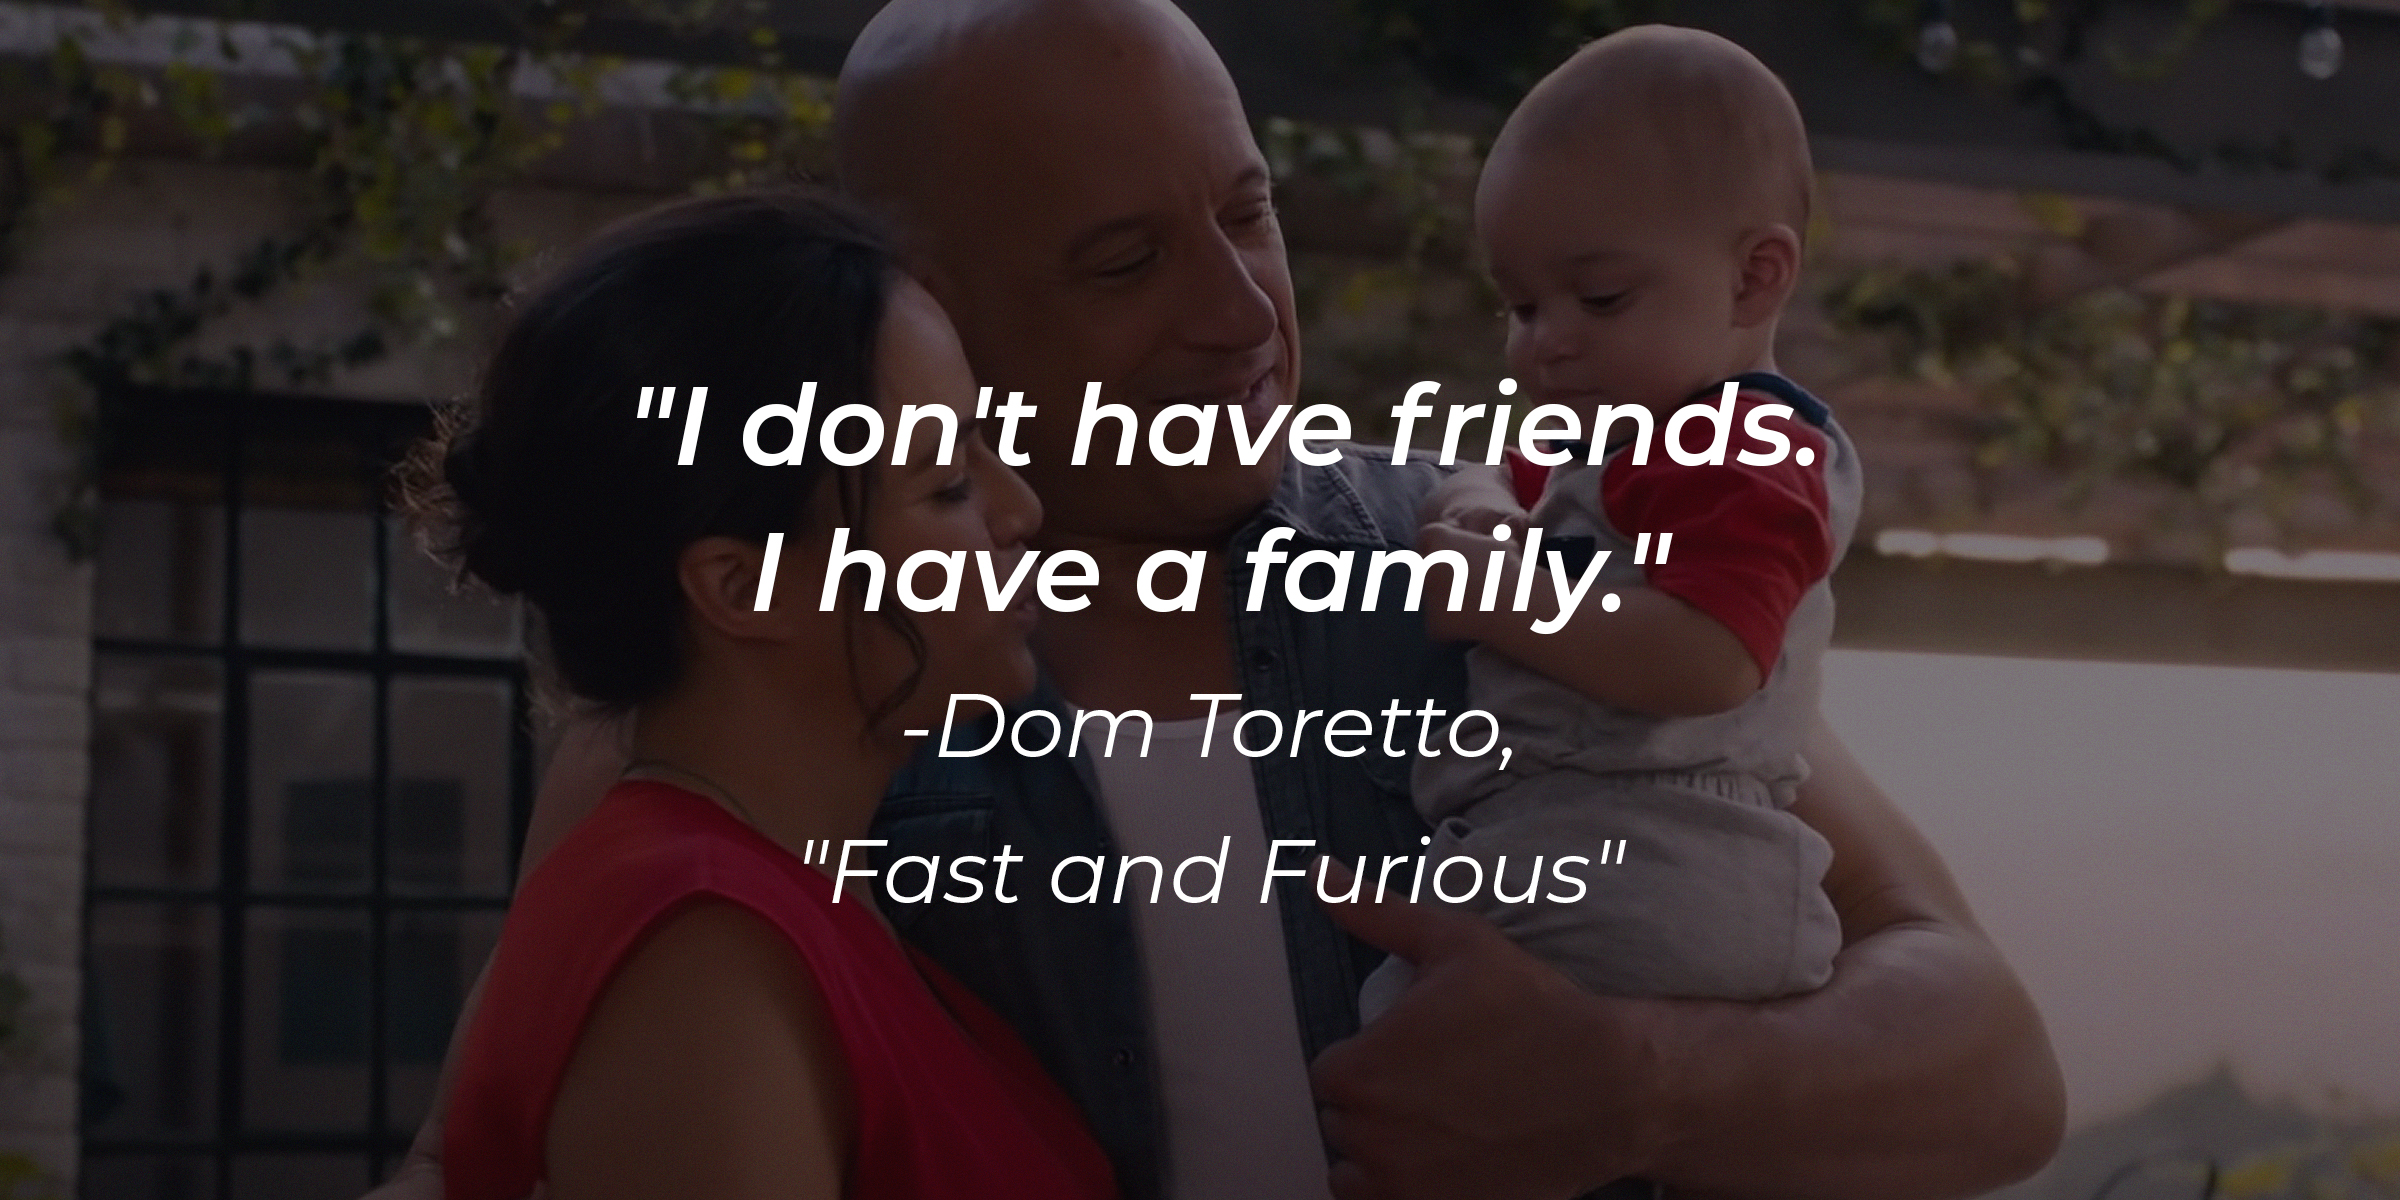 An image of Dom Toretto from the "Fast and Furious" with the quote, "I don't have friends. I have a family." | Source: facebook.com/TheFastSaga